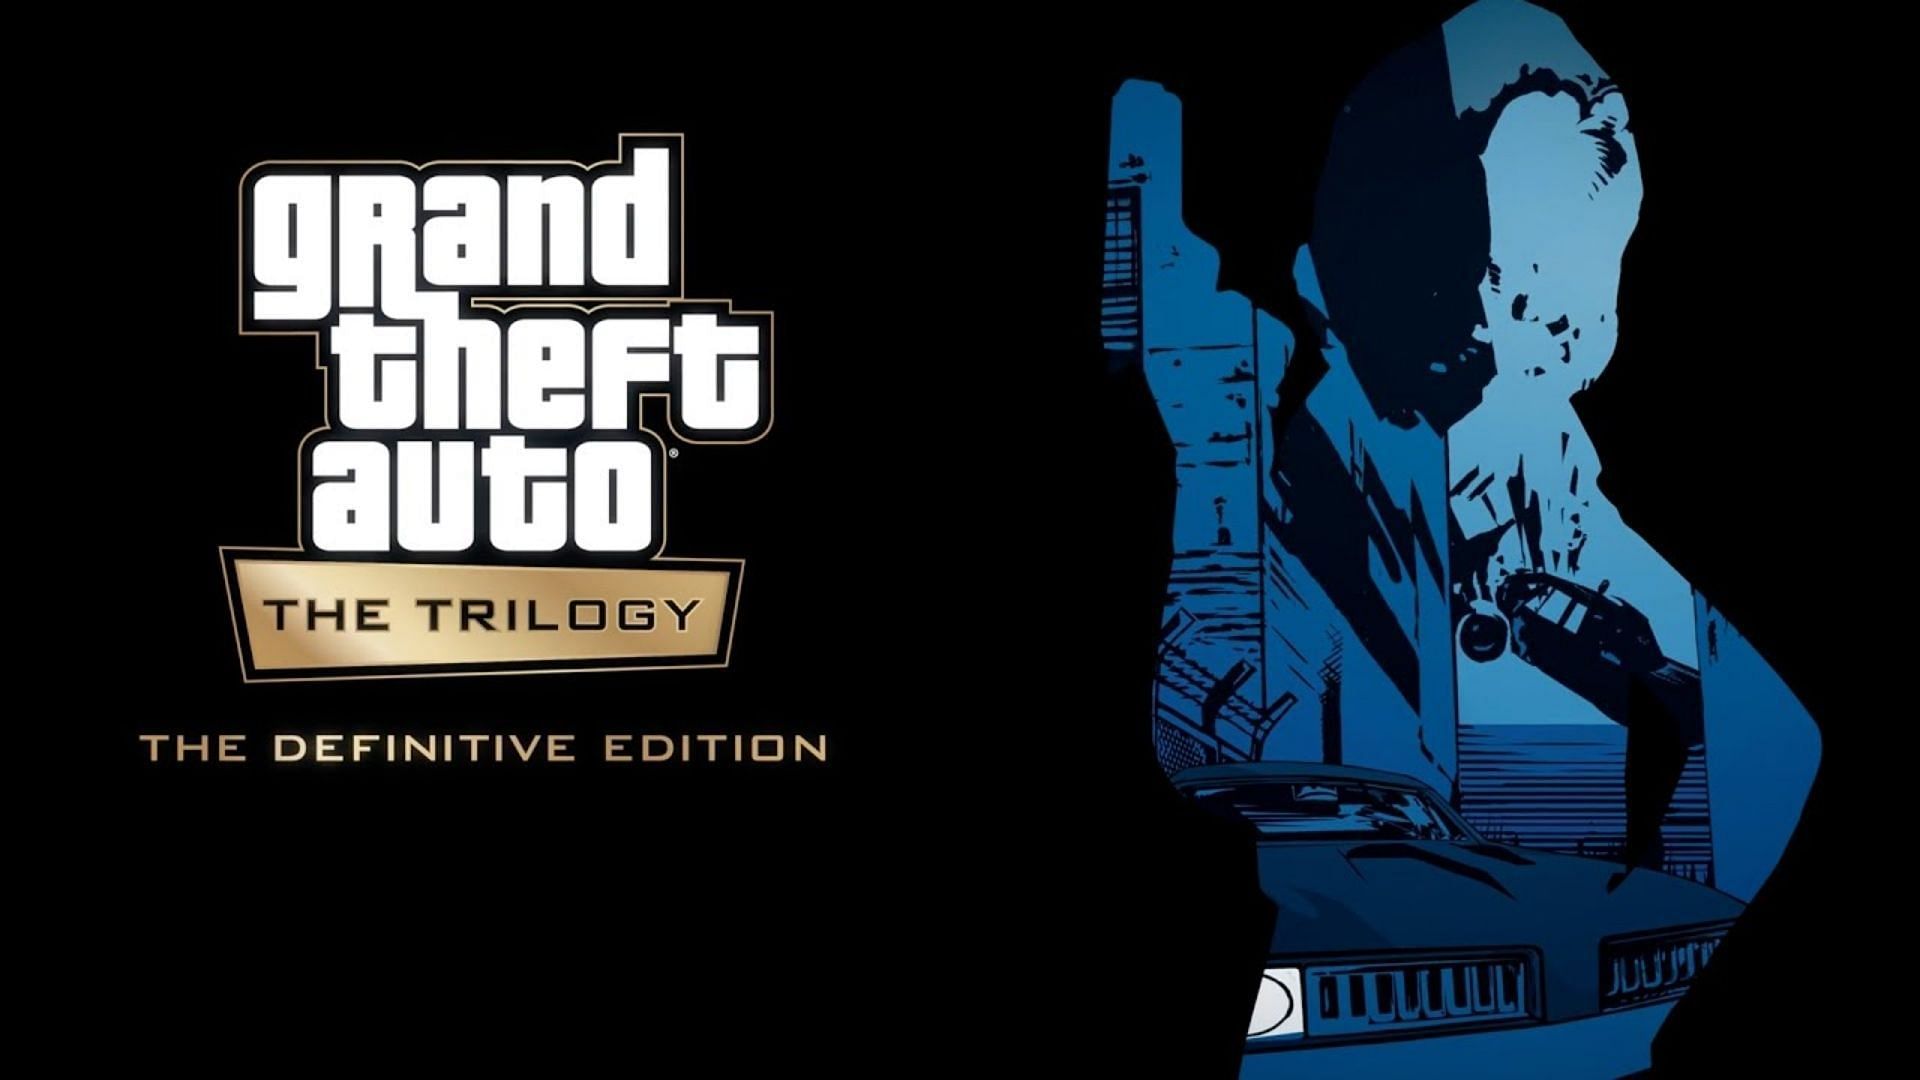 Gta the trilogy the definitive edition. Grand Theft auto 3 Definitive Edition. Grand Theft auto: the Trilogy - the Definitive Edition. GTA the Trilogy the Definitive 2021. GTA Trilogy Definitive Edition.